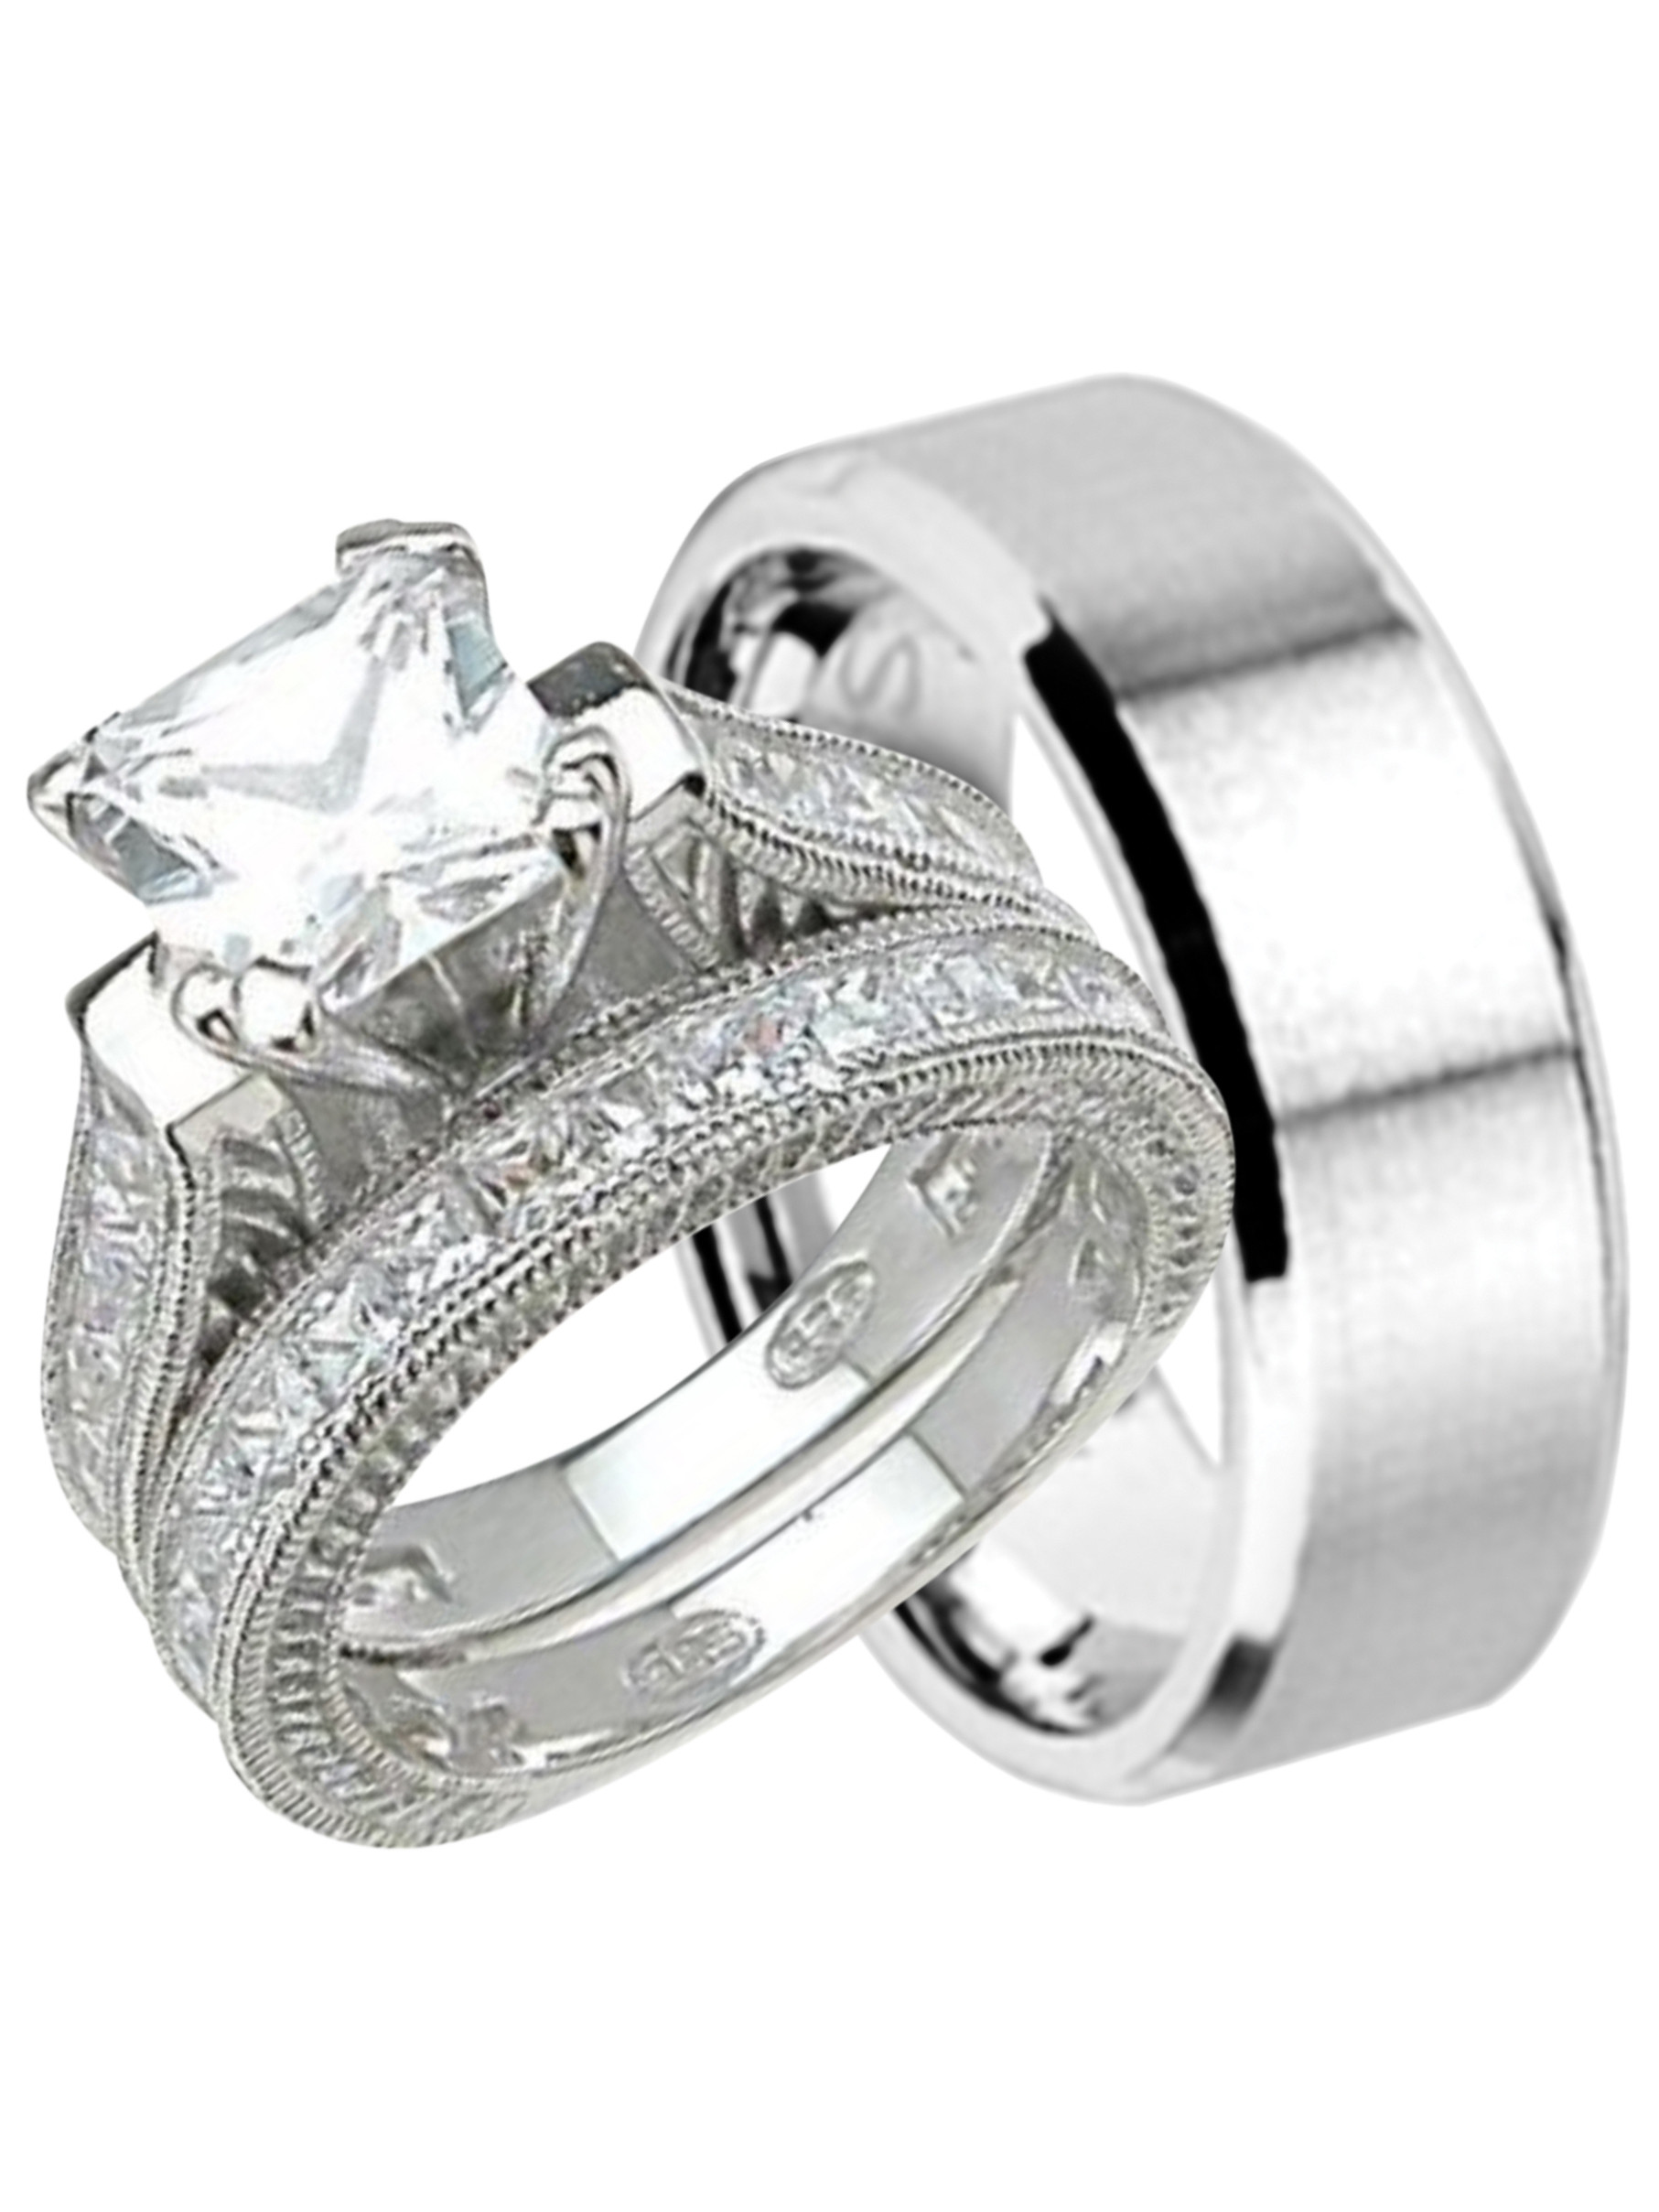 Cheap Wedding Rings Sets For Him And Her
 LaRaso & Co His and Hers Wedding Ring Set Cheap Wedding